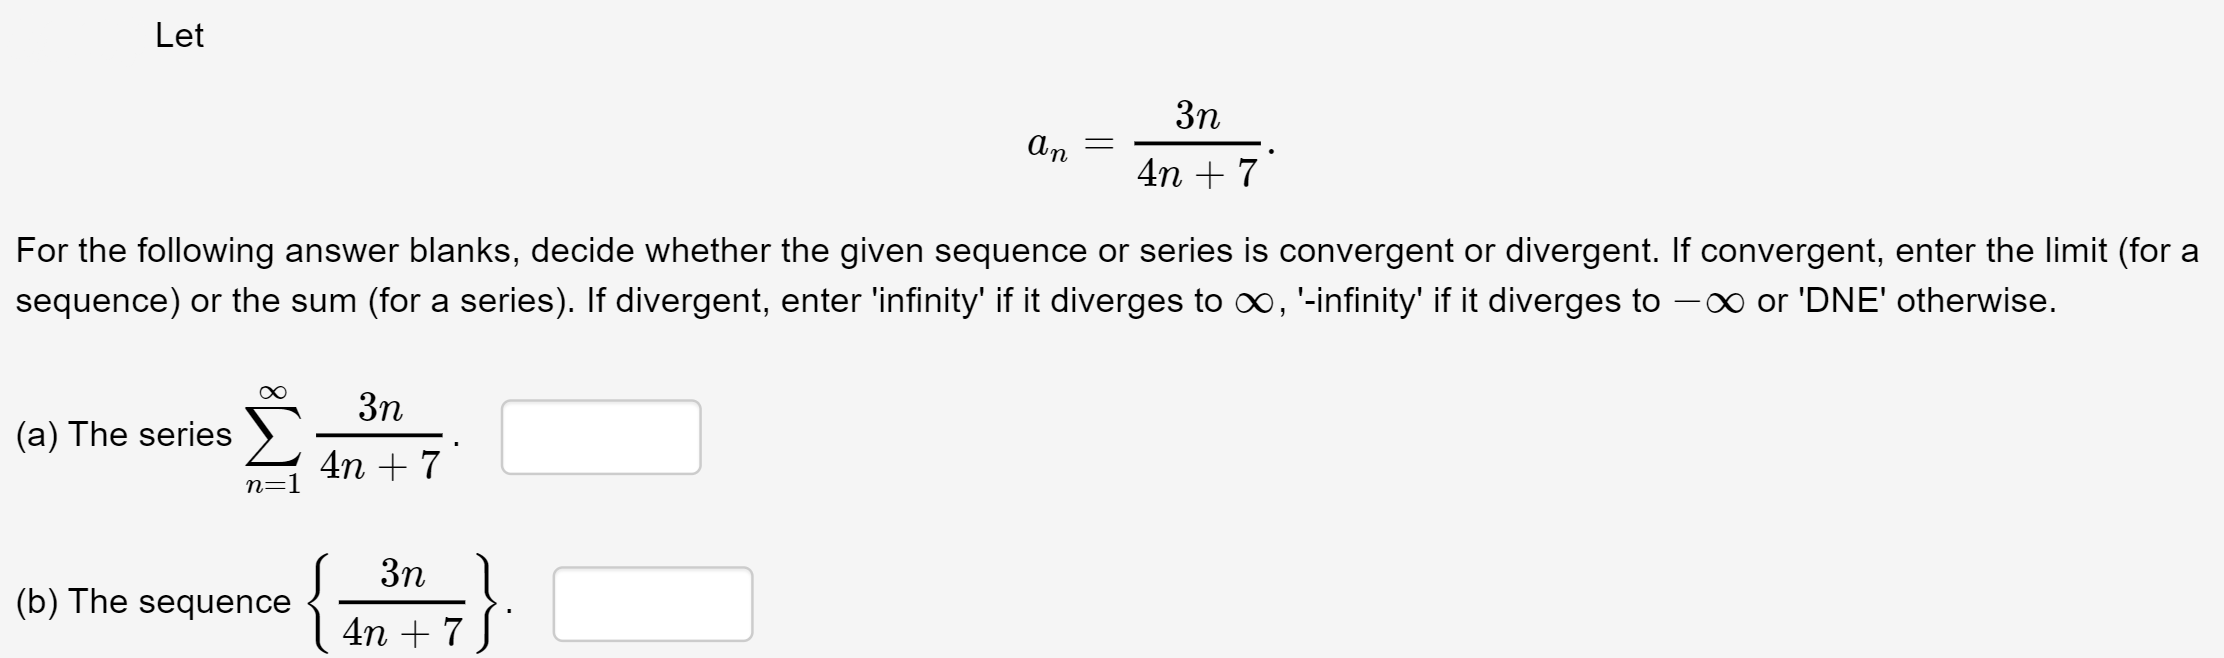 3n
An
4n + 7
For the following answer blanks, decide whether the given sequence or series is convergent or divergent. If convergent, enter the limit (for a
sequence) or the sum (for a series). If divergent, enter 'infinity' if it diverges to o, '-infinity' if it diverges to -0 or 'DNE' otherwise.
3n
(a) The series )
4n + 7
n=1
3n
(b) The sequence
4n + 7
